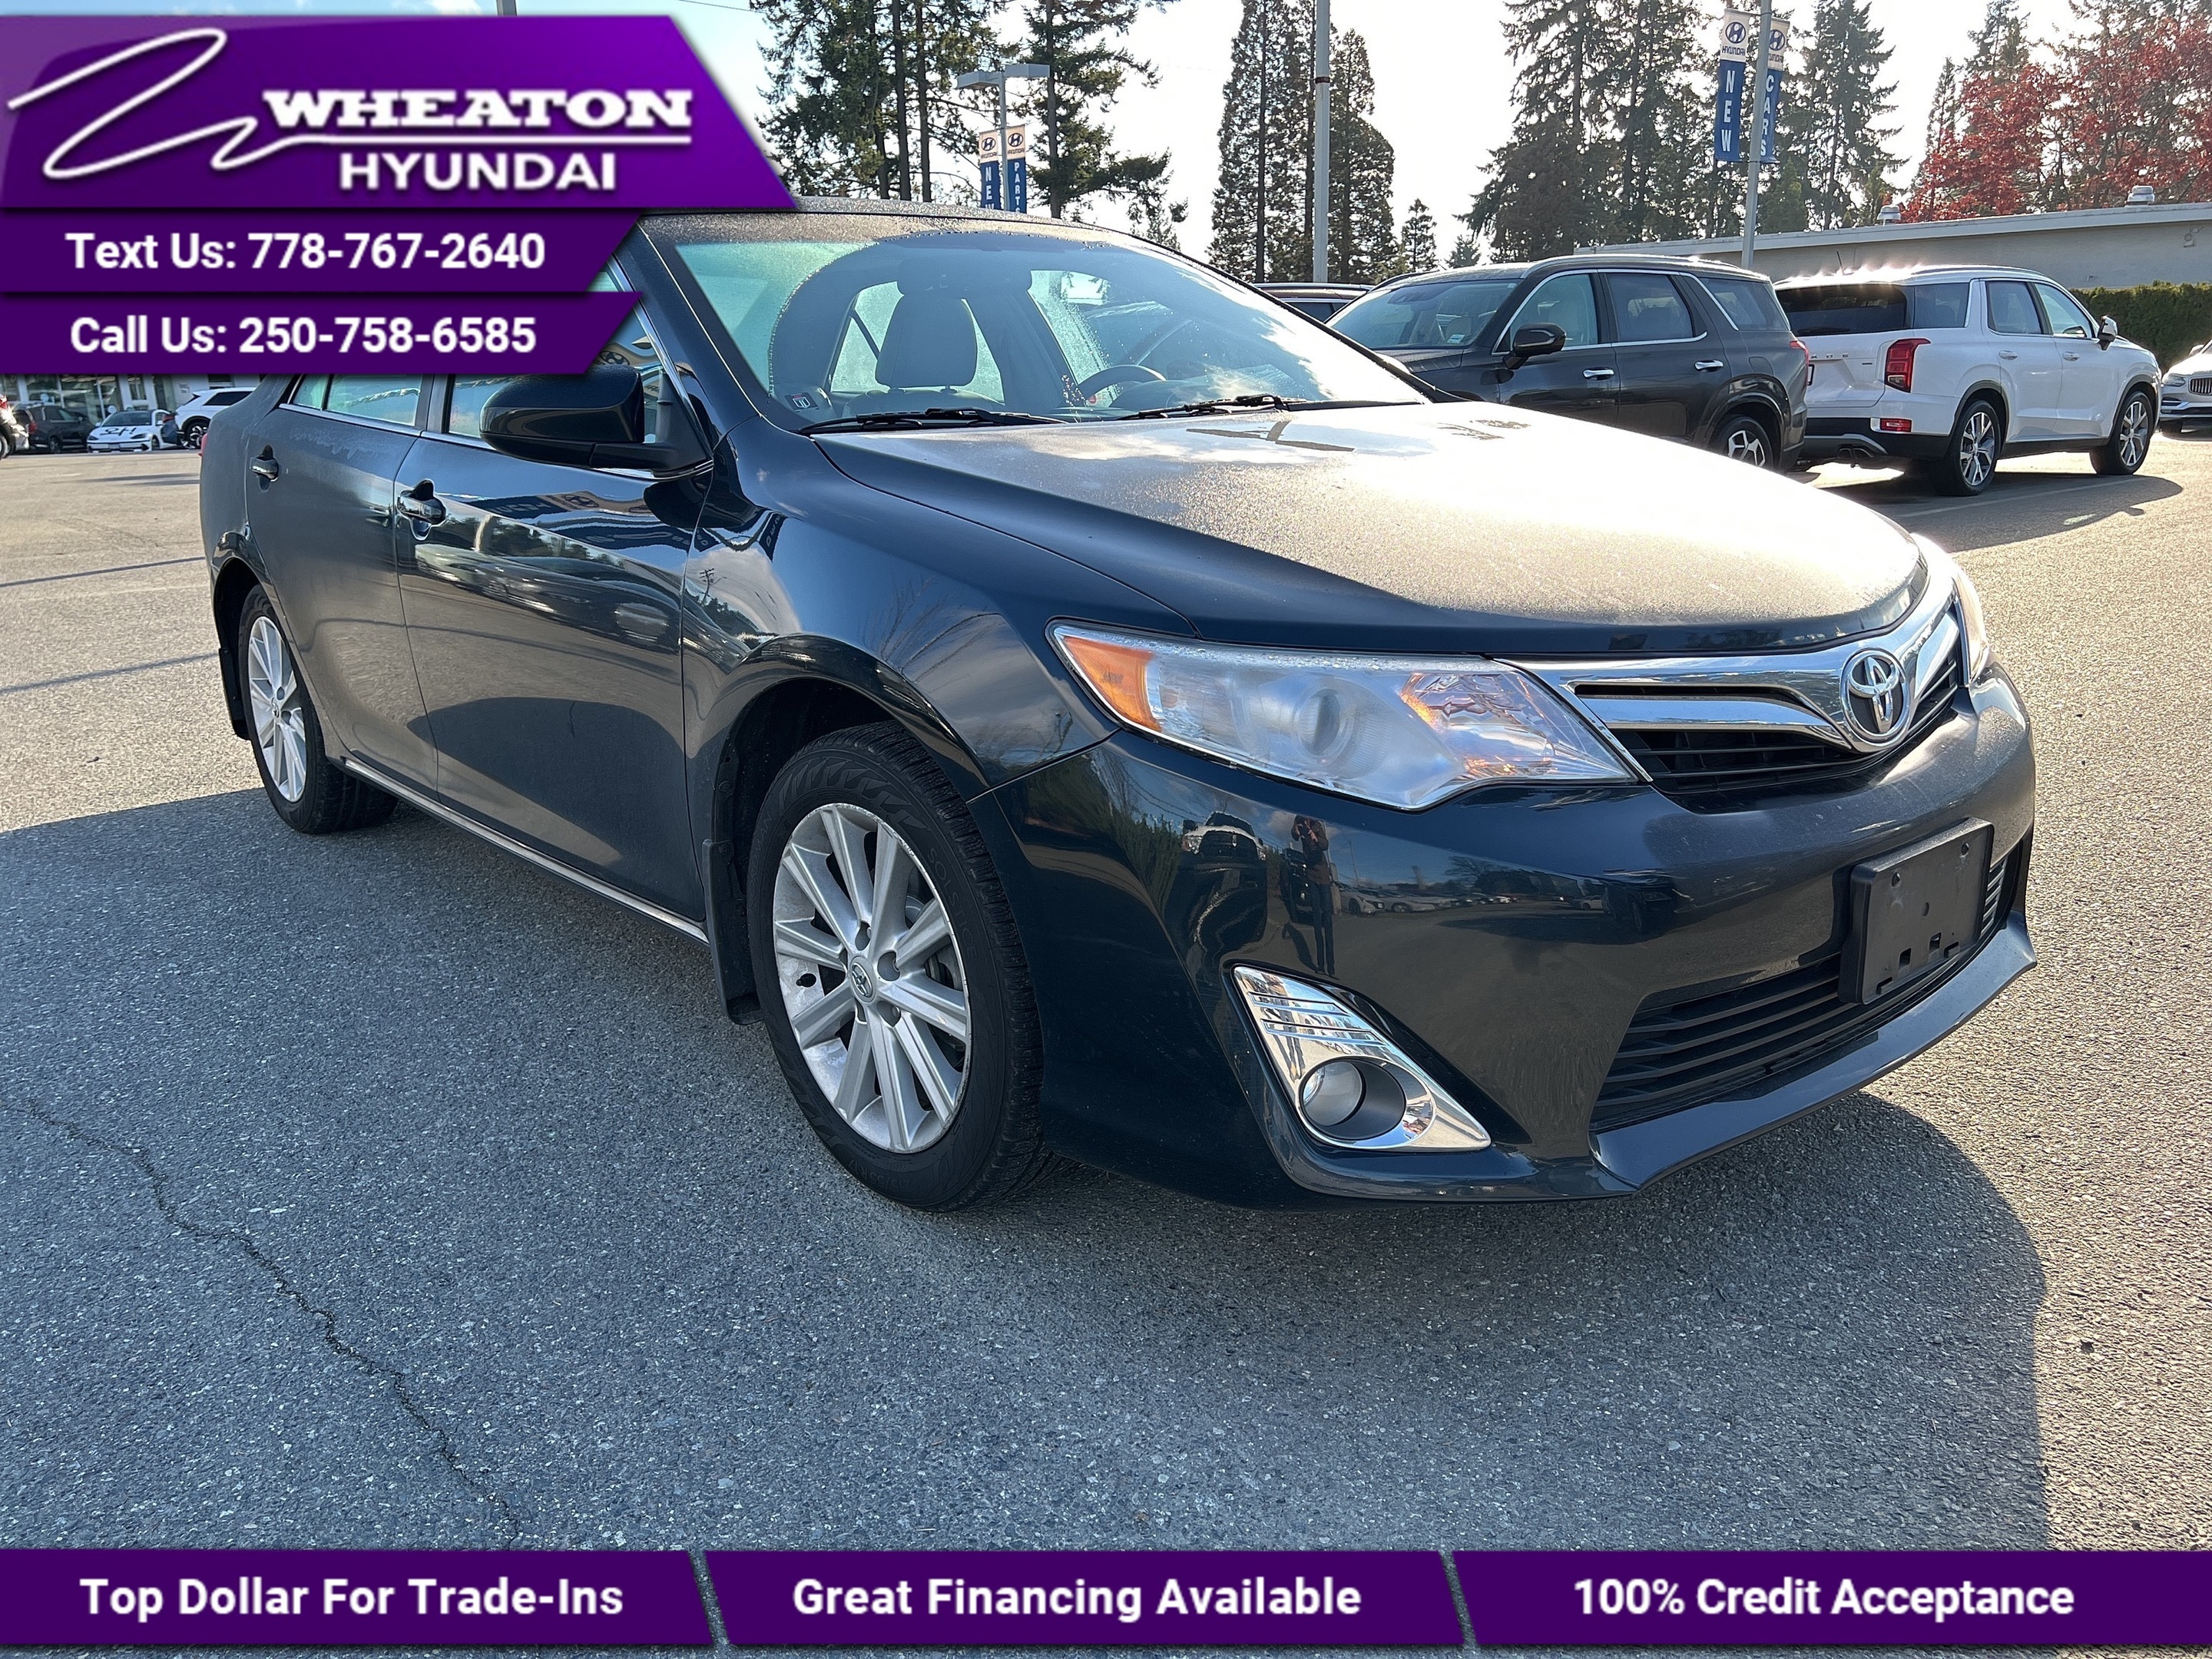 2012 Toyota Camry XLE, BC Car, Trade in, Navigation, Leather, Heated